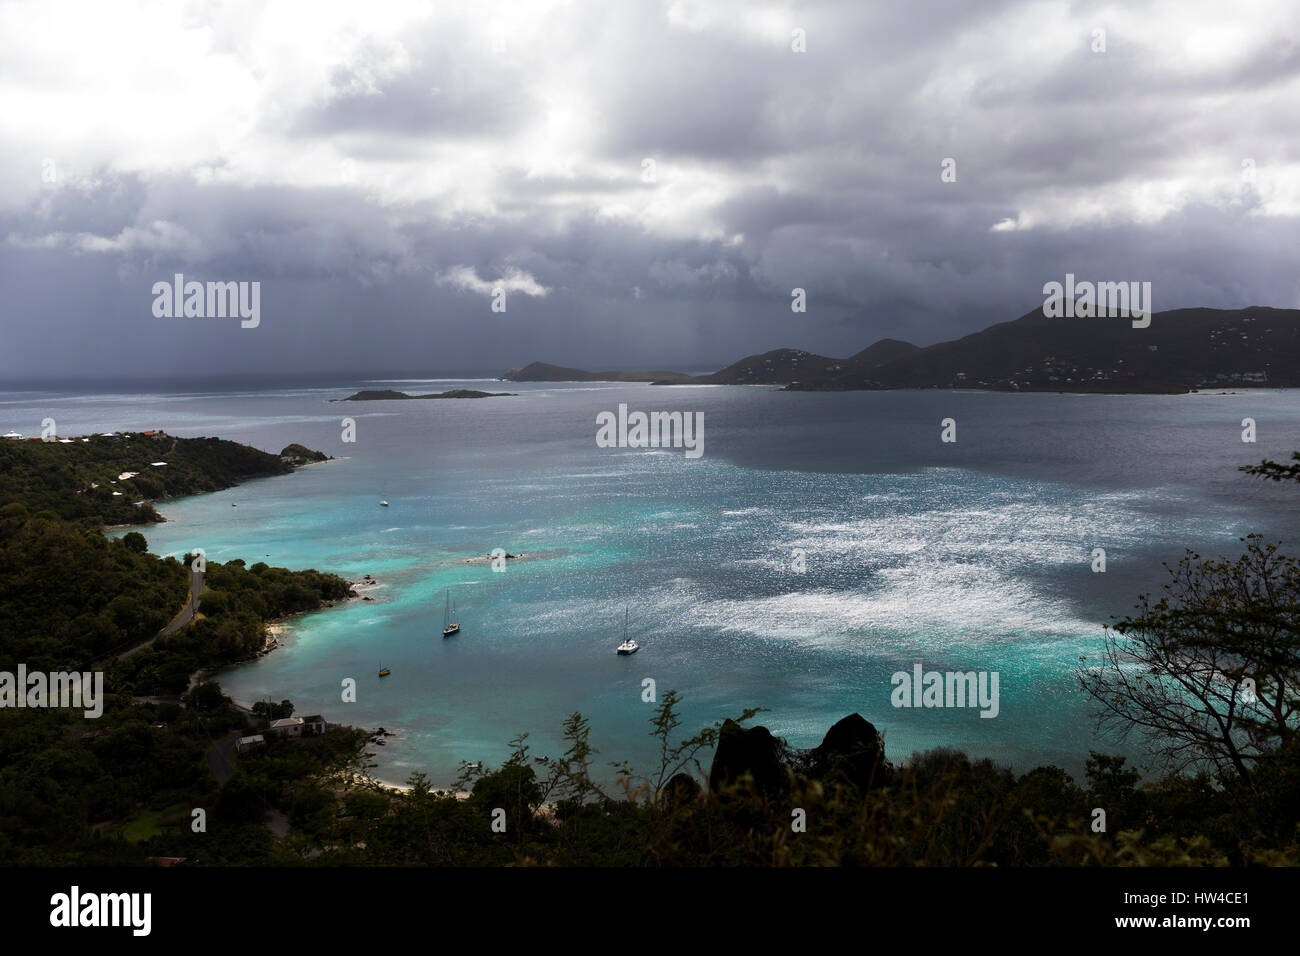 Aerial view of ocean and lush coastline Stock Photo